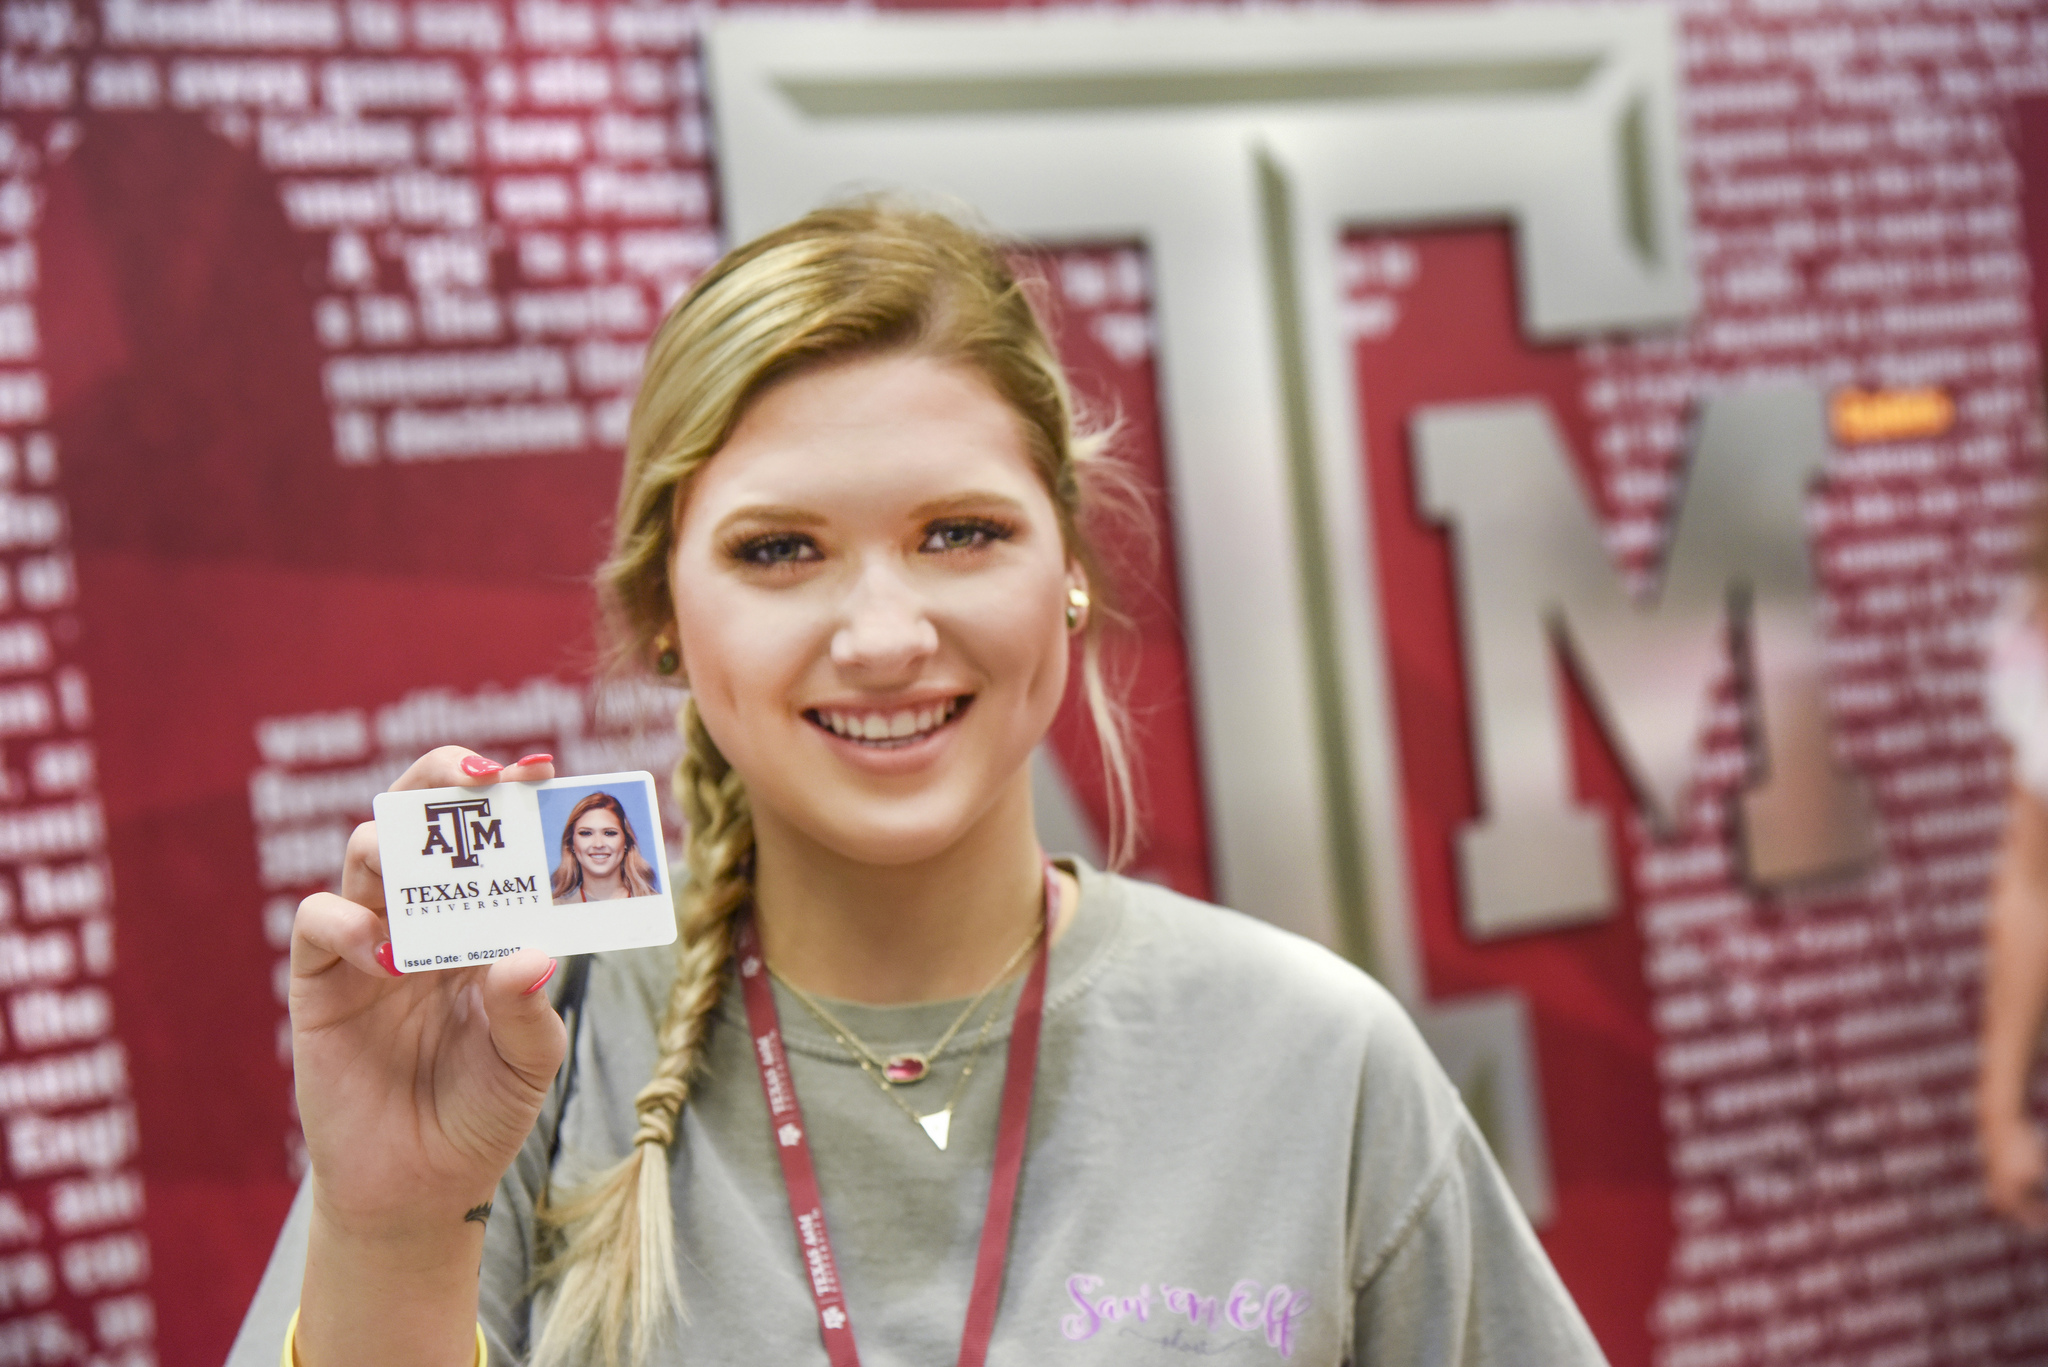 female student holding up an Aggie Card